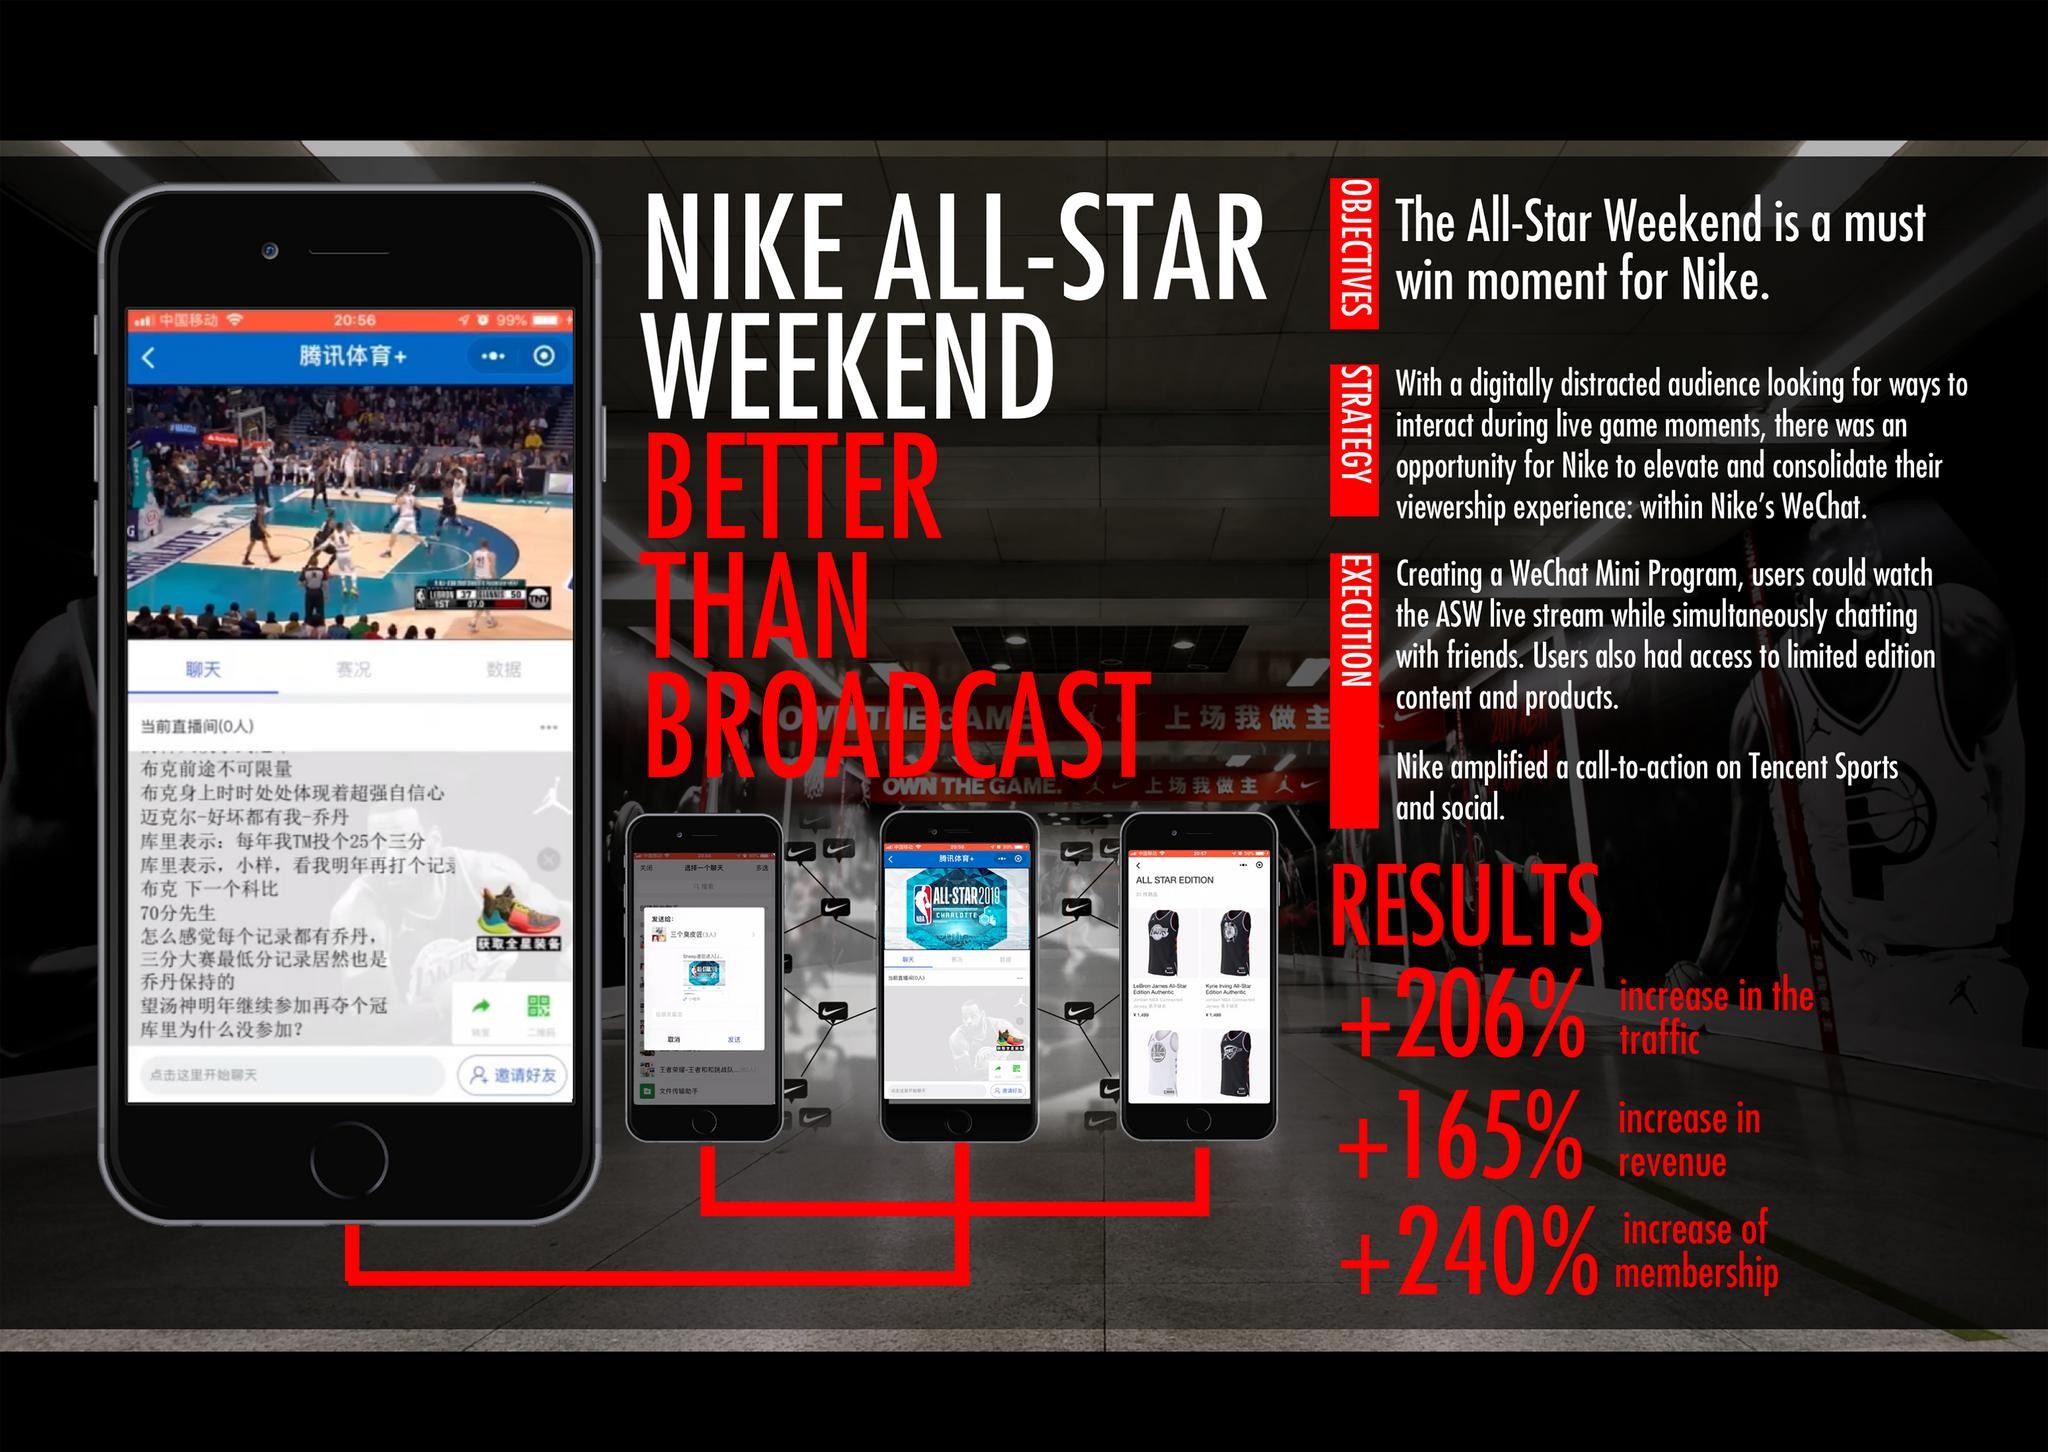 Nike's All-Star Weekend: Better than Broadcast